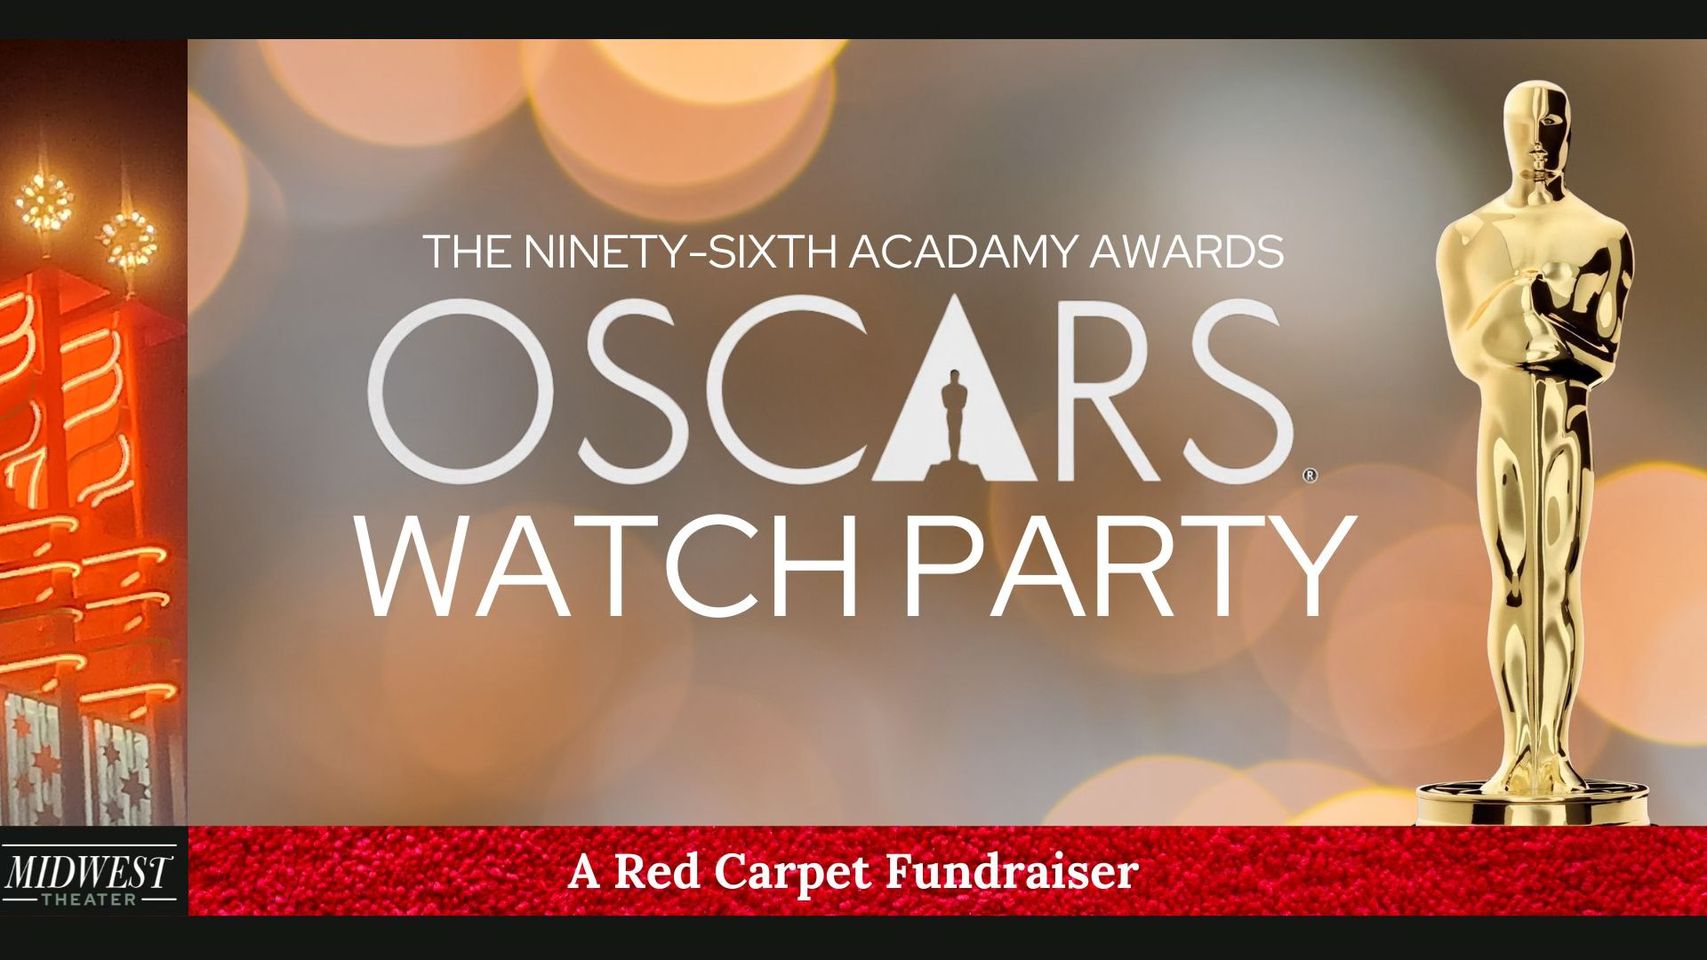 Event Promo Photo For Oscars Watch Party